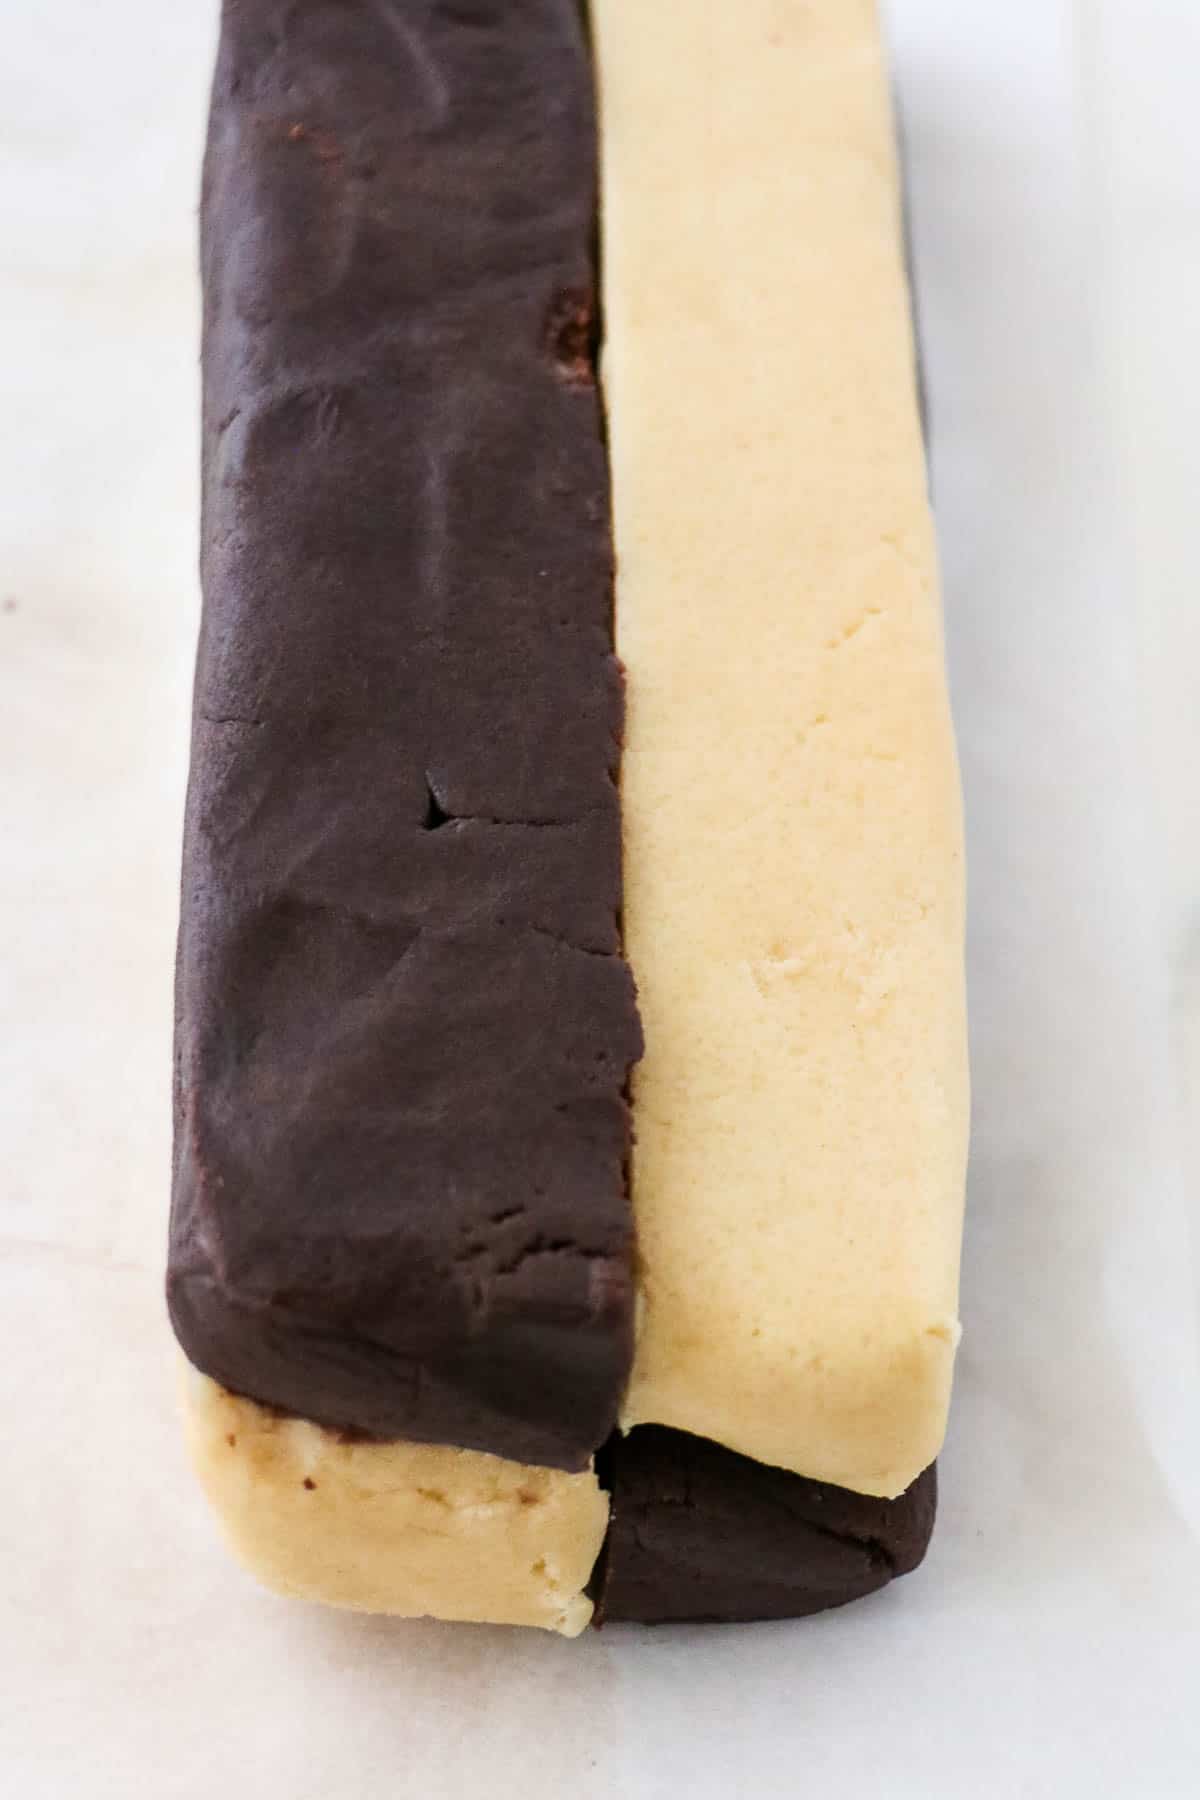 Alternating layers of chocolate and vanilla cookie dough in a log shape.